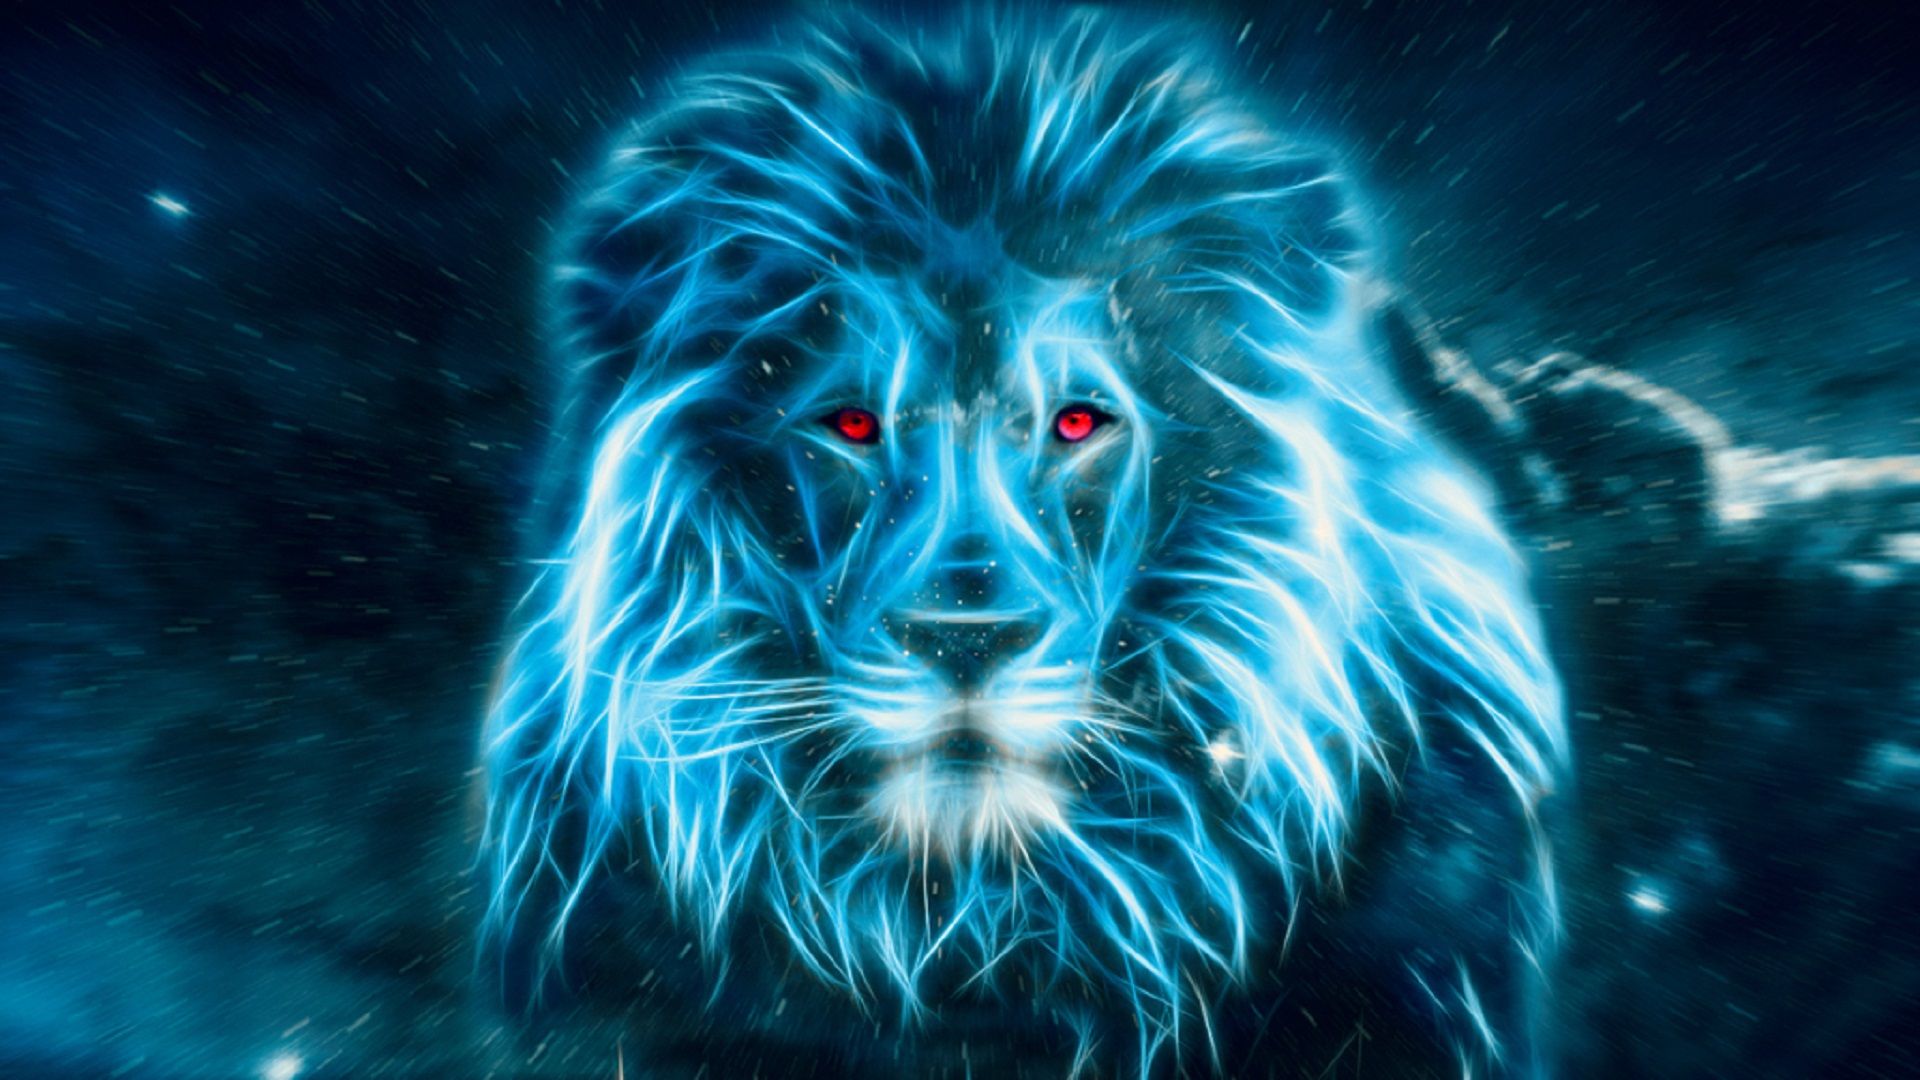 Lion in blue Wallpaper[19201080] #Music #IndieArtist #Chicago. Lion picture, Lion live wallpaper, Lion HD wallpaper